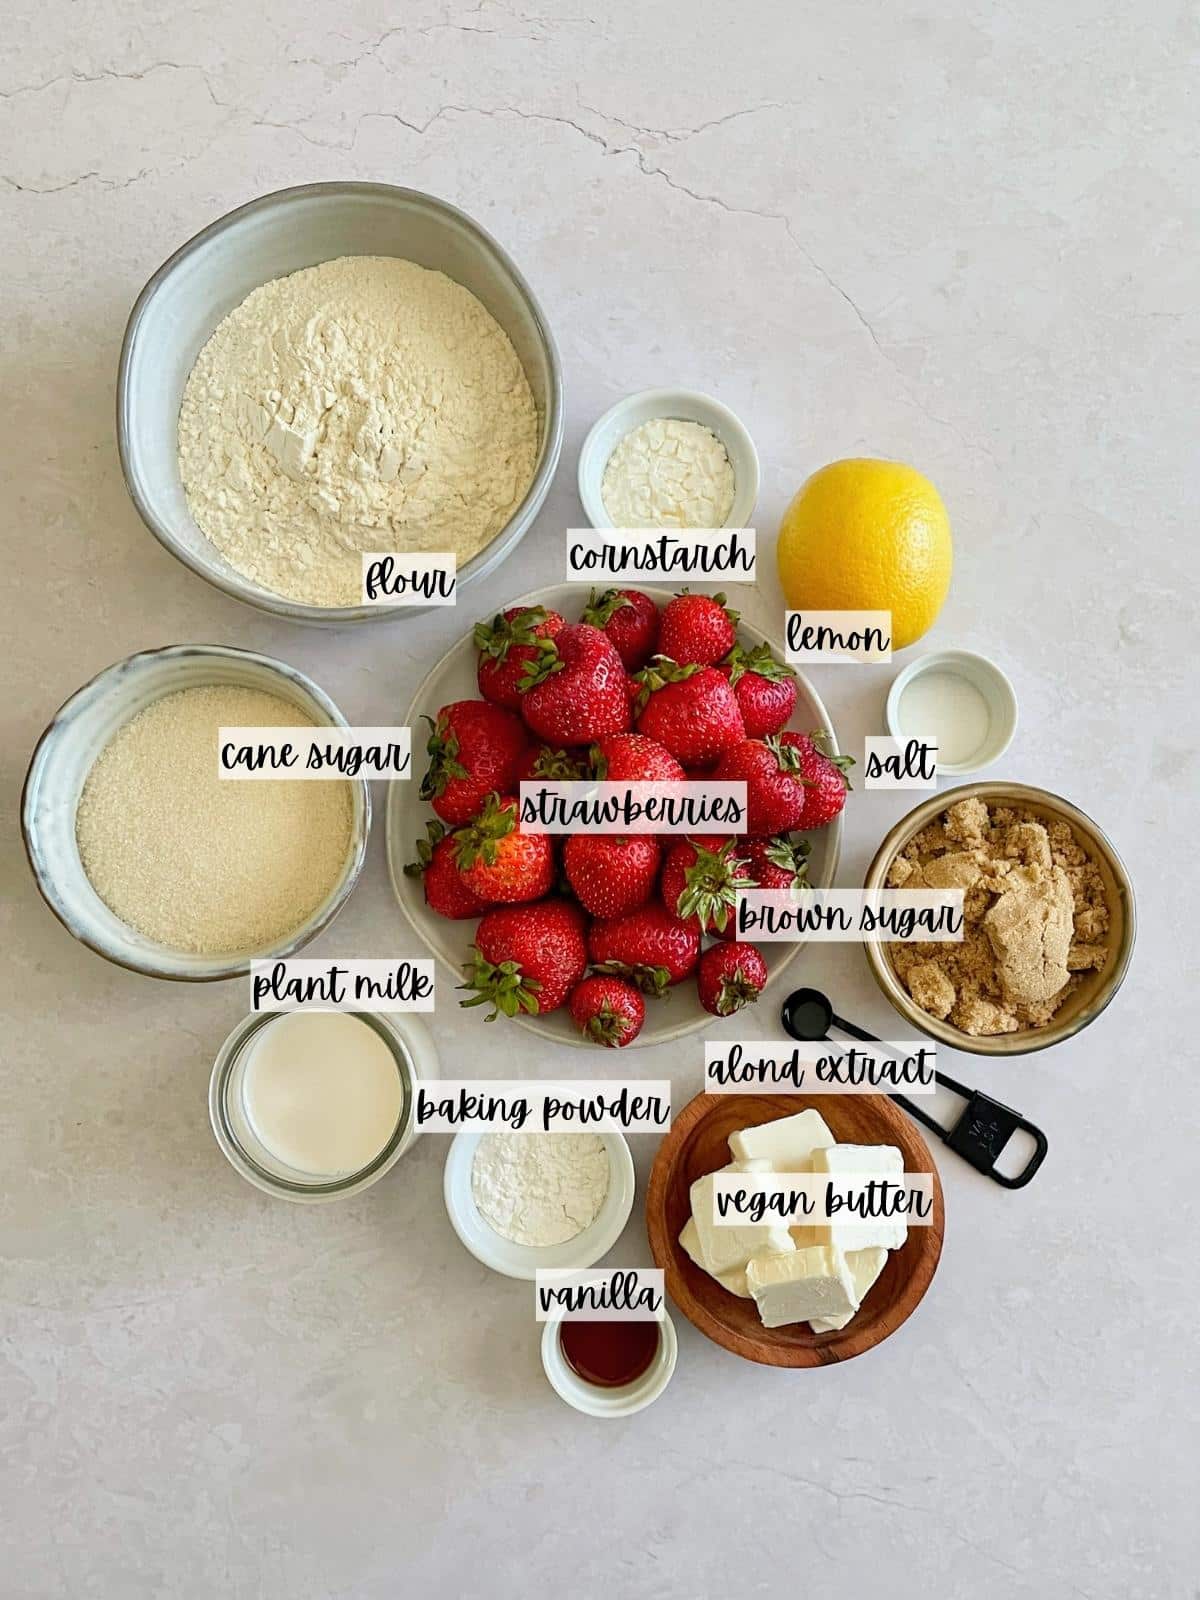 Labeled ingredients for strawberry cobbler.